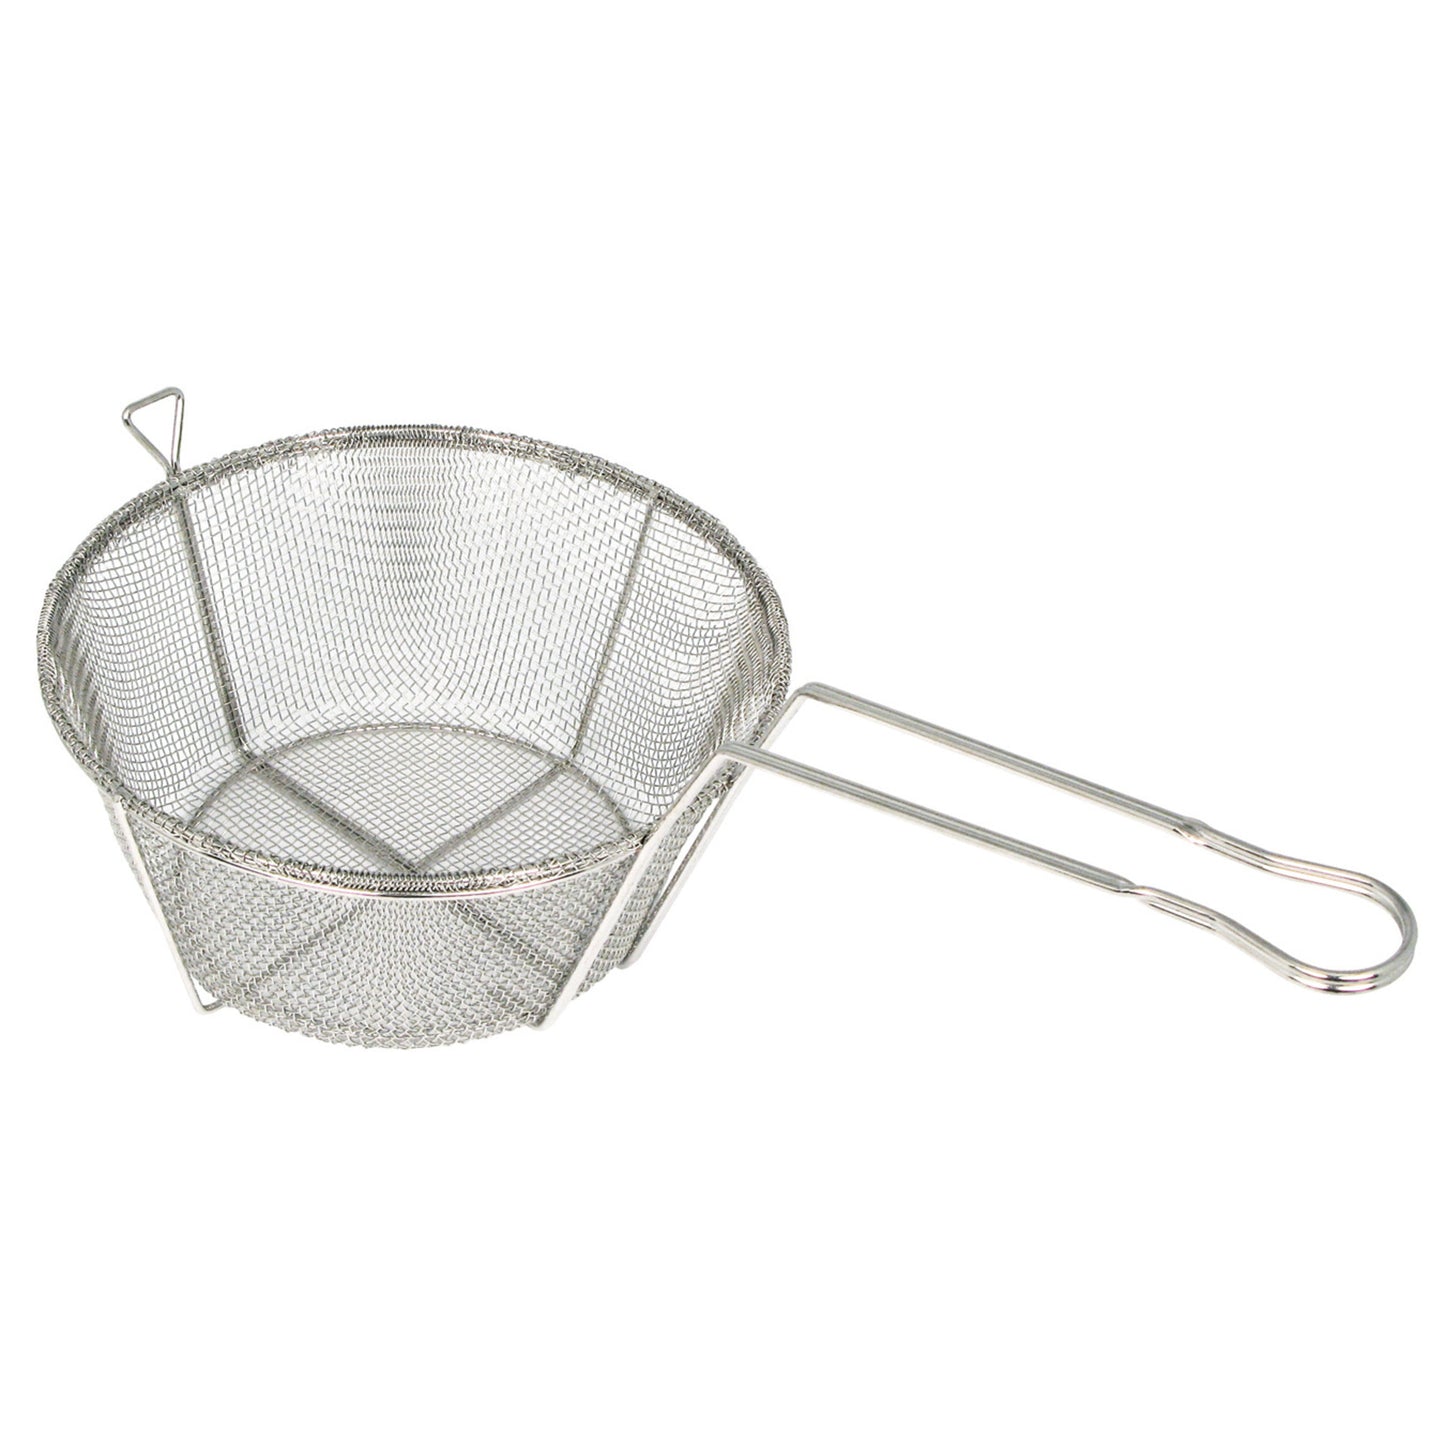 FBRS-9 - Round 6mm Mesh Wire Fry Basket - 9-5/8" Dia